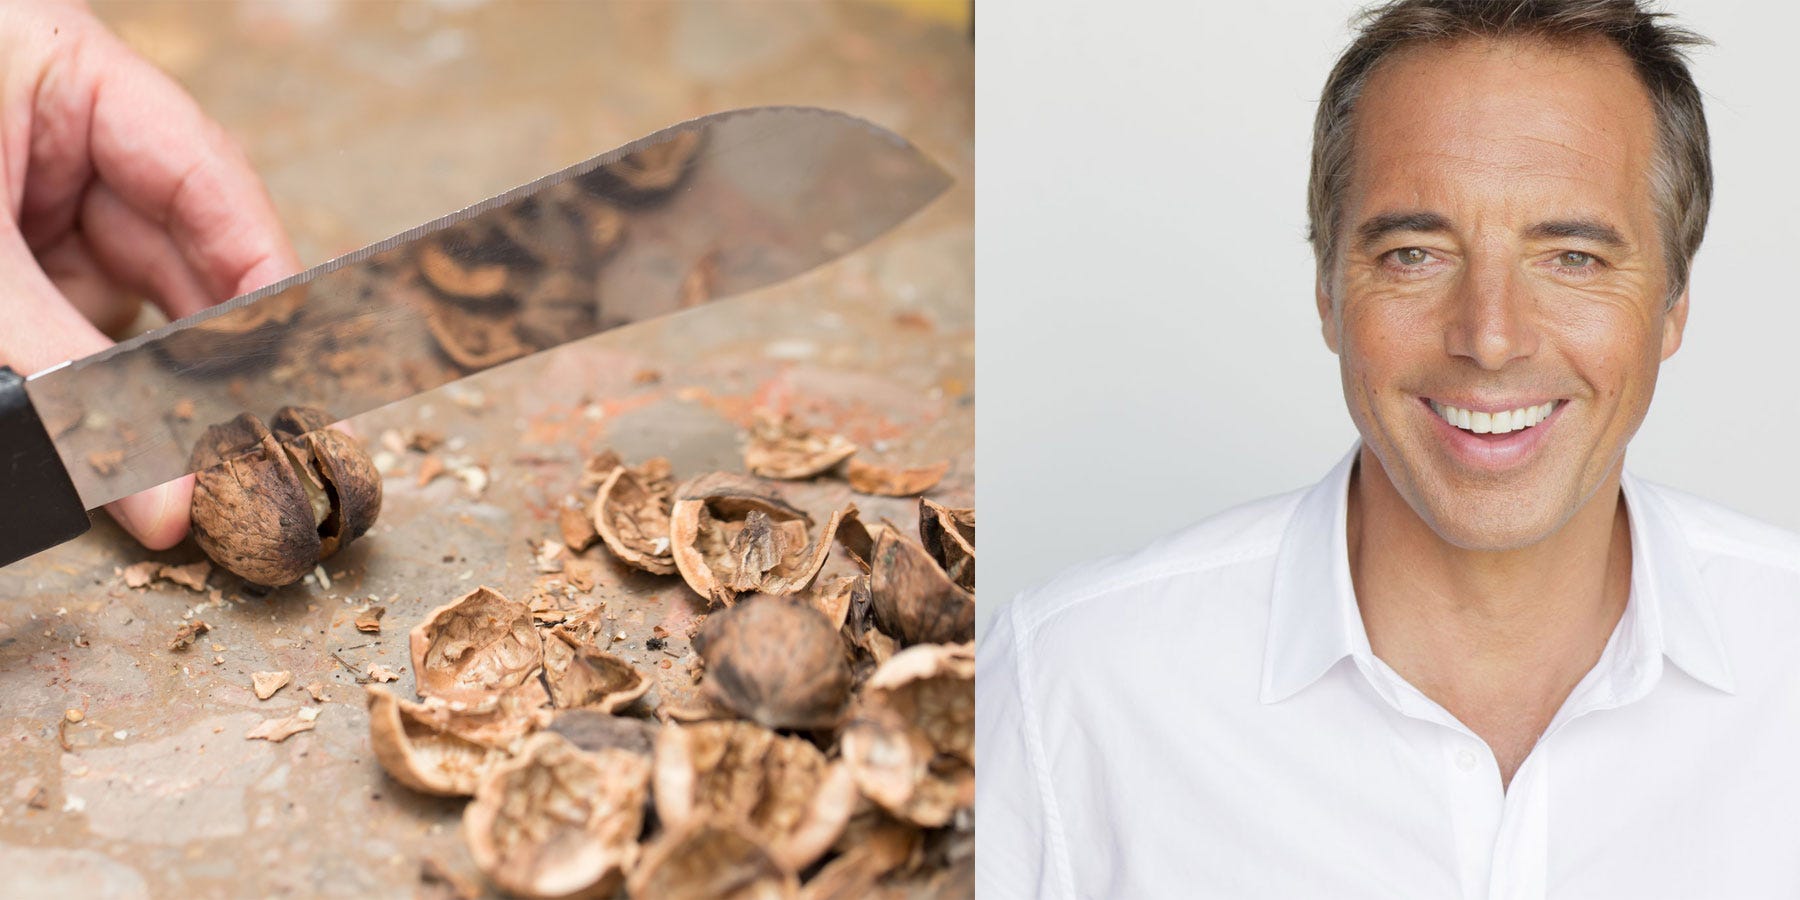 Dan Buettner suggests avoiding supplements and using walnuts instead.